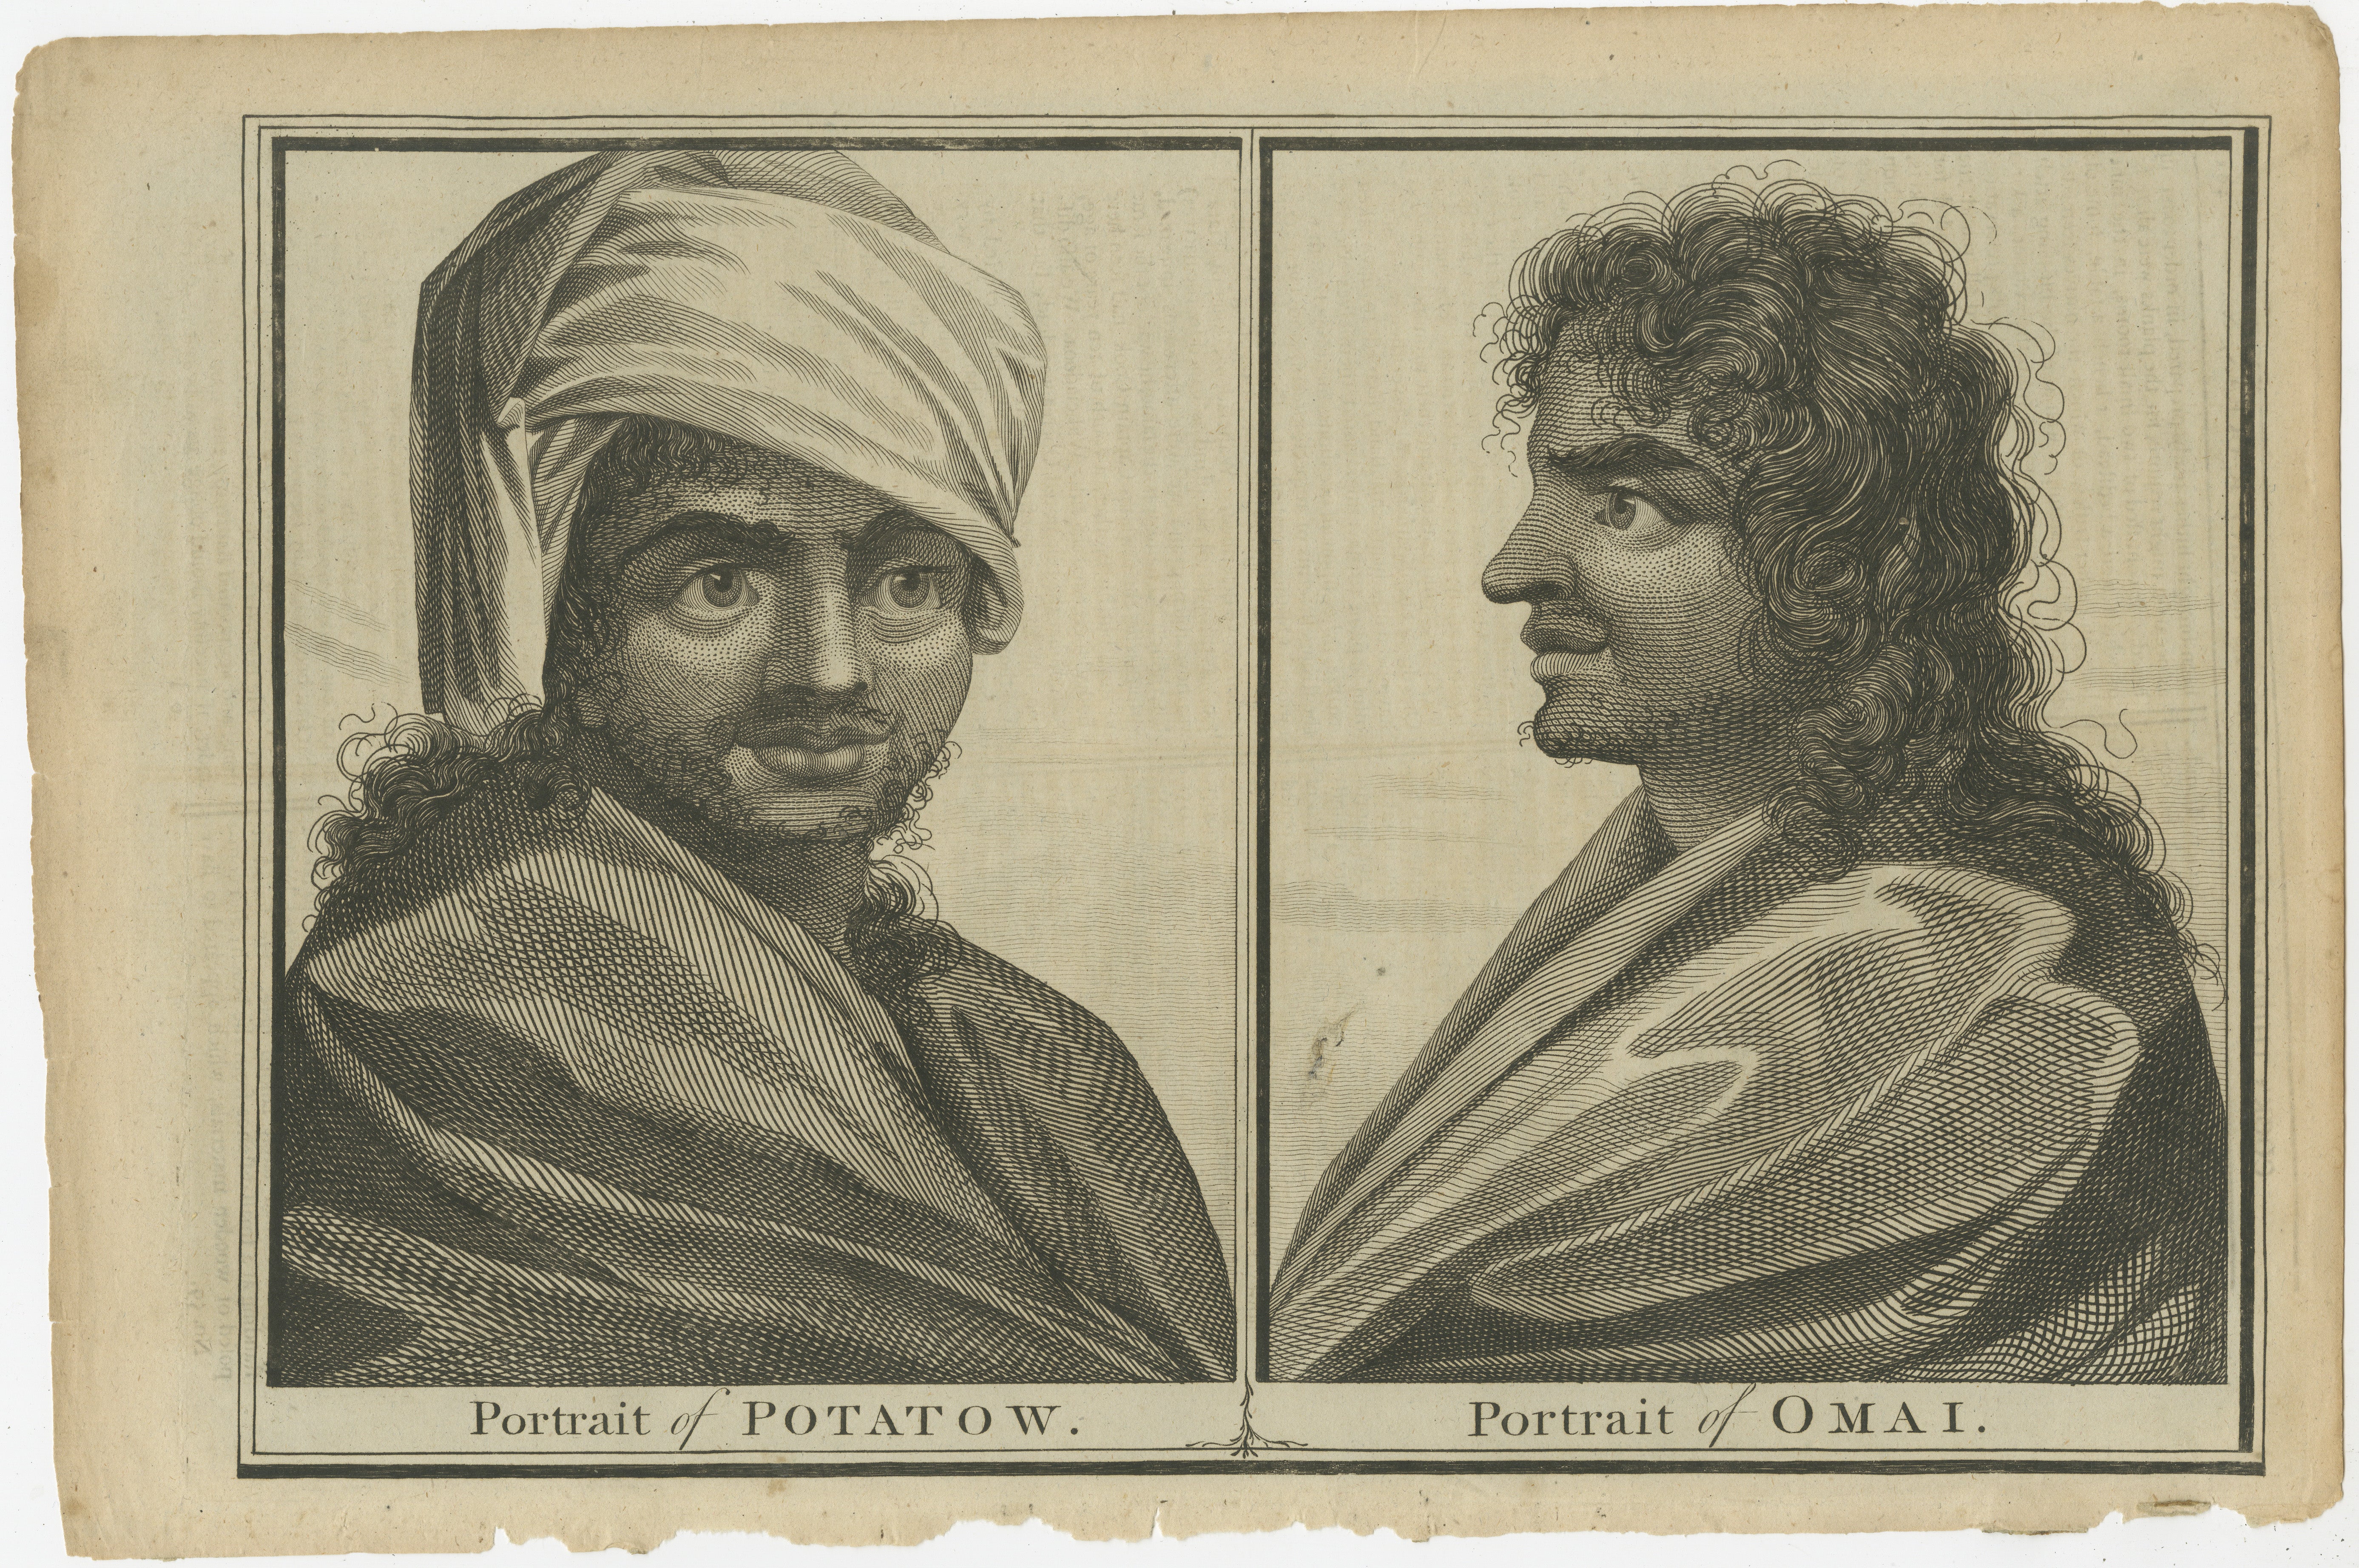 The original antique engraving for sale presents side-by-side portraits of two individuals from Tahiti, labeled as 